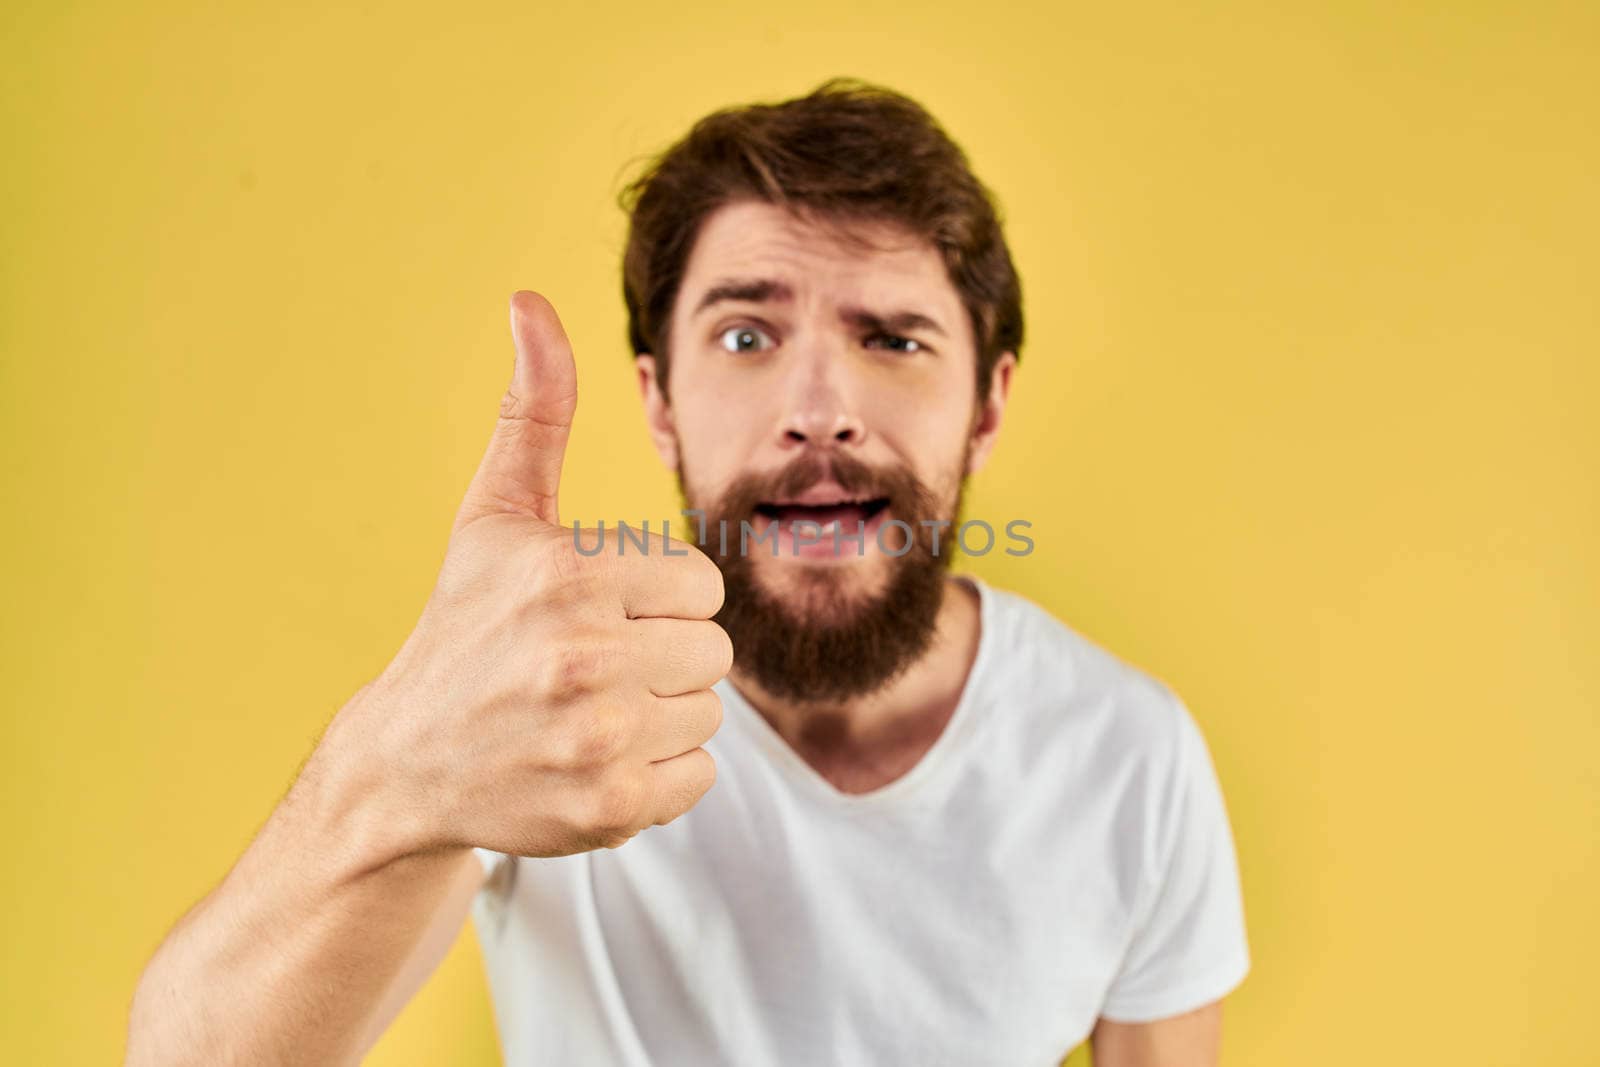 Bearded man emotions fun gesture with hands white t-shirt close-up yellow background. High quality photo